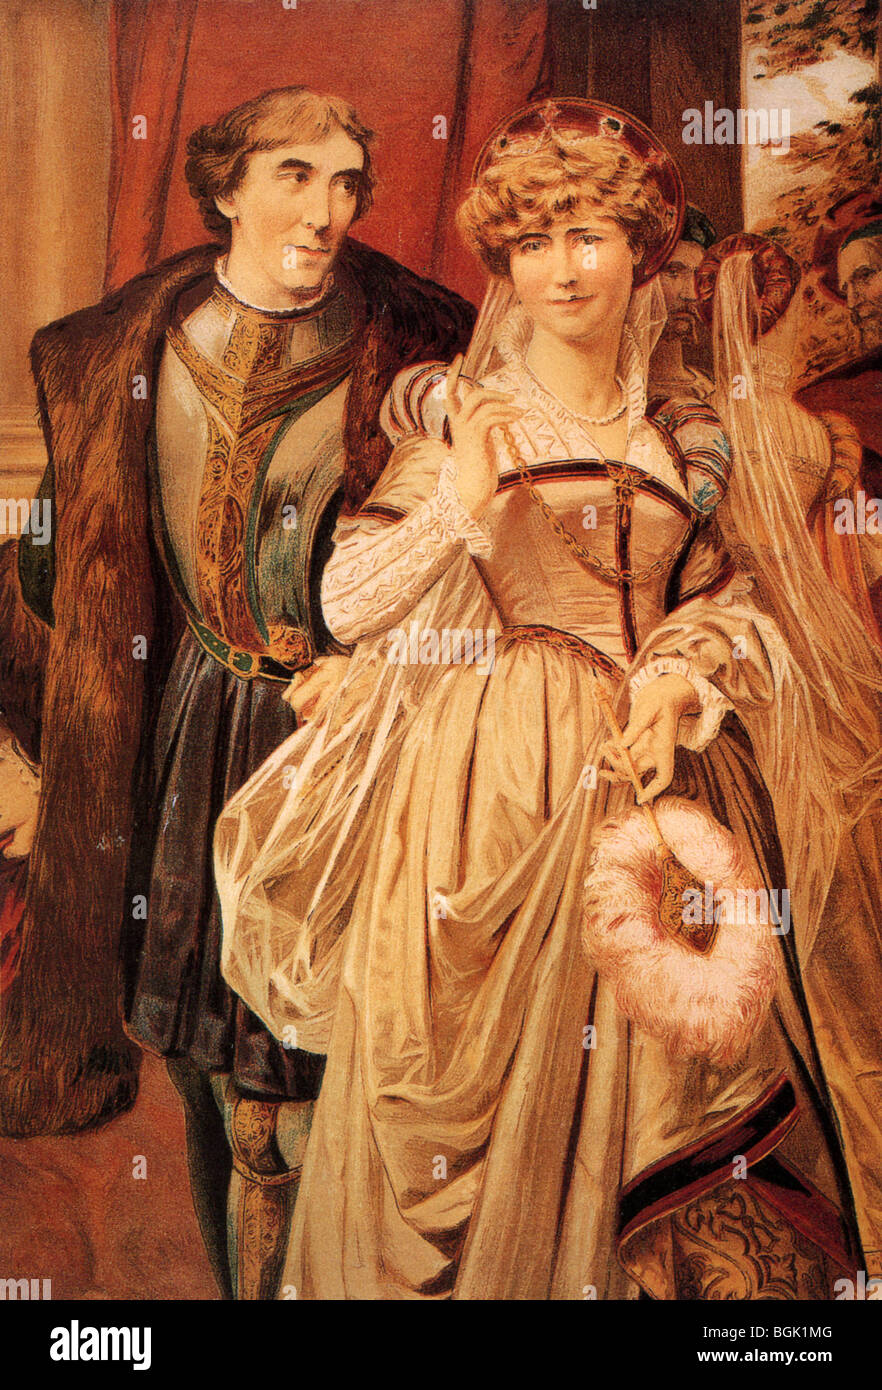 SIR HENRY IRVING and ELLEN TERRY as Benedick and Beatrice in 'Much Ado About Nothing' as drawn by Edward Craig in 1899 Stock Photo